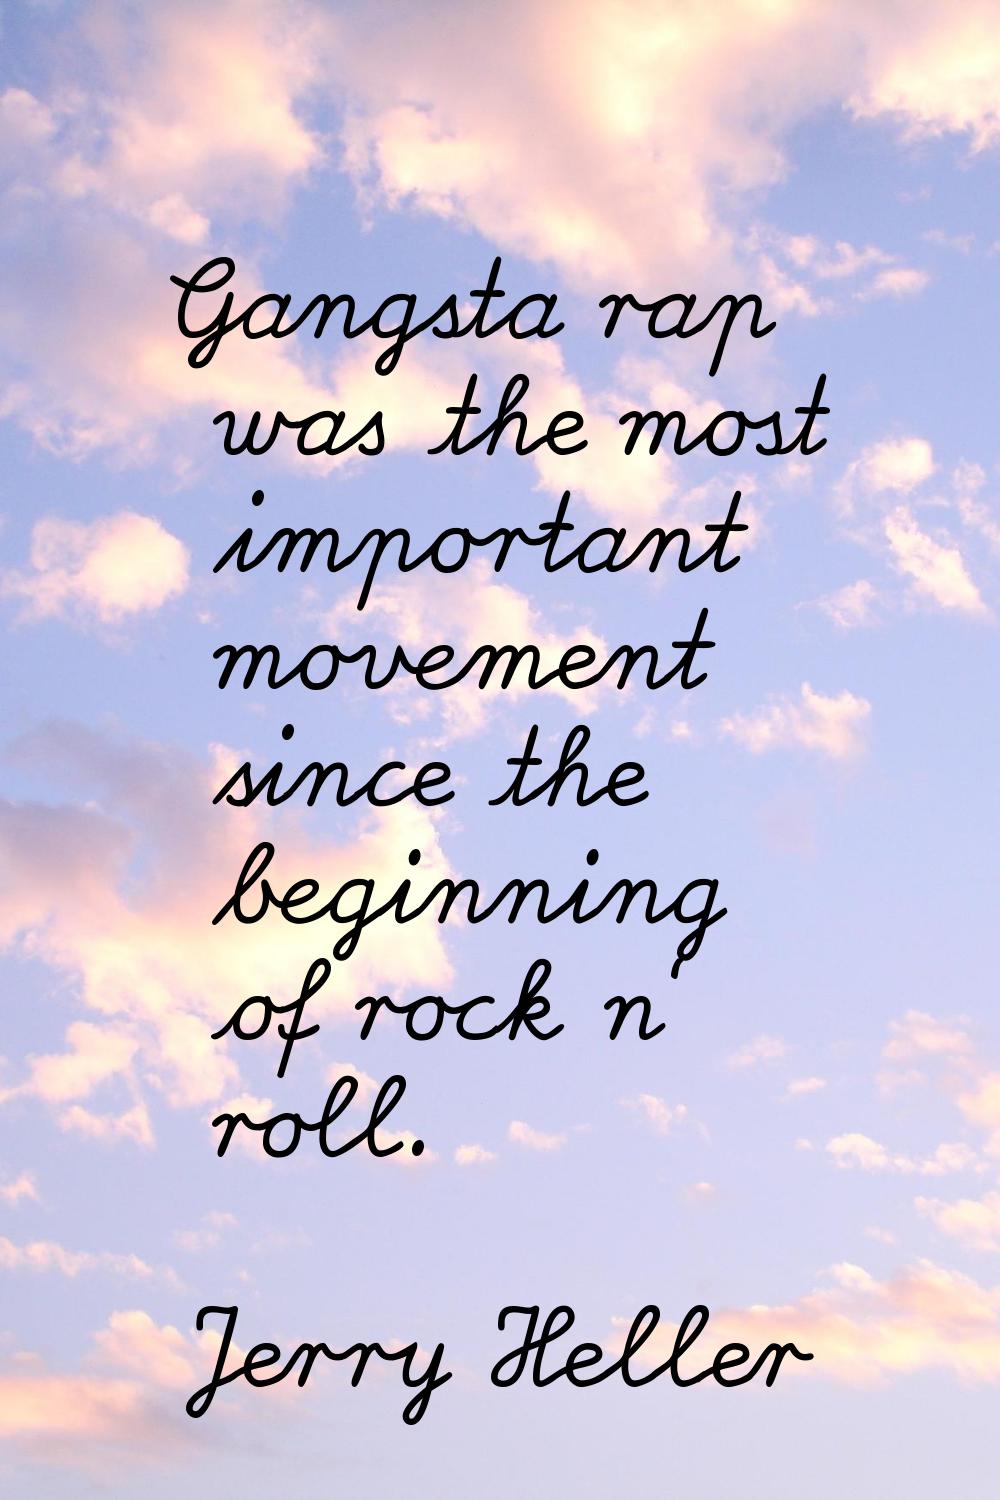 Gangsta rap was the most important movement since the beginning of rock n' roll.